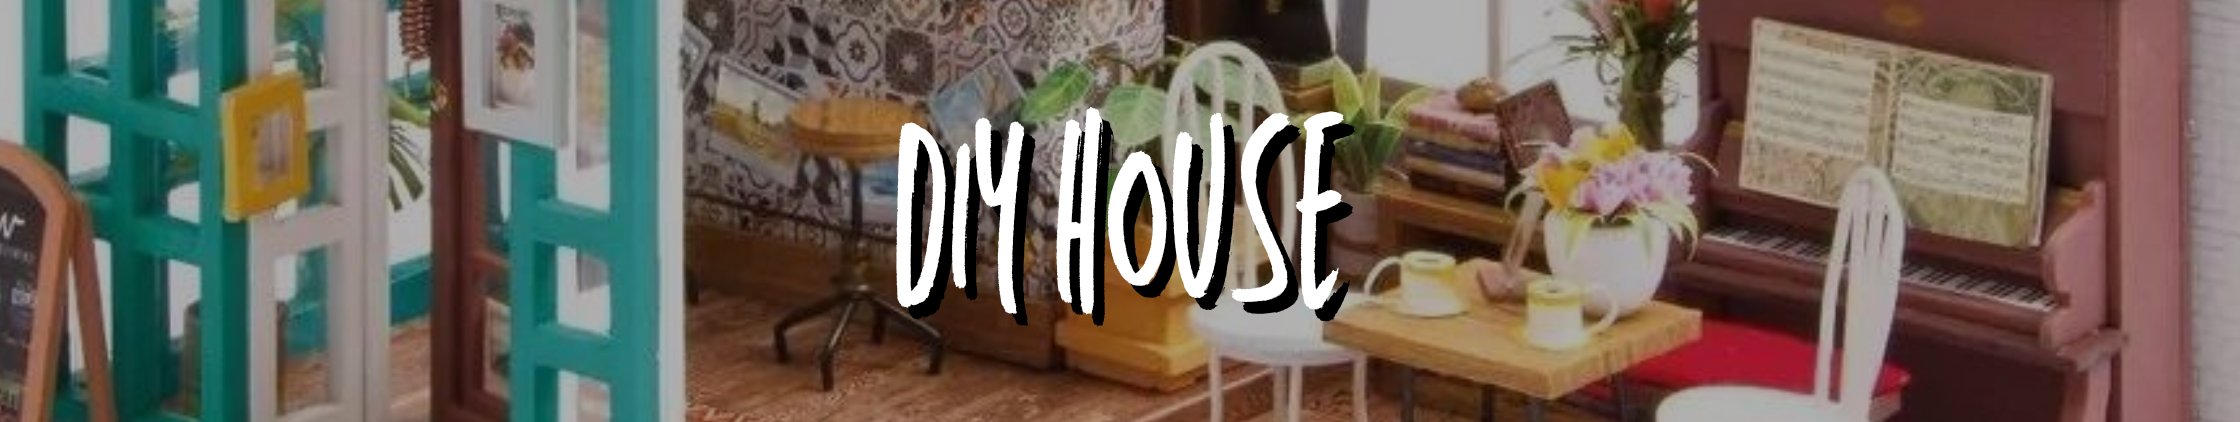 Try a DIY House dollhouse room kit from BC Hobbies, based out of Victoria BC. We ship Canada-Wide with flat shipping and orders over $150 qualify for free shipping!